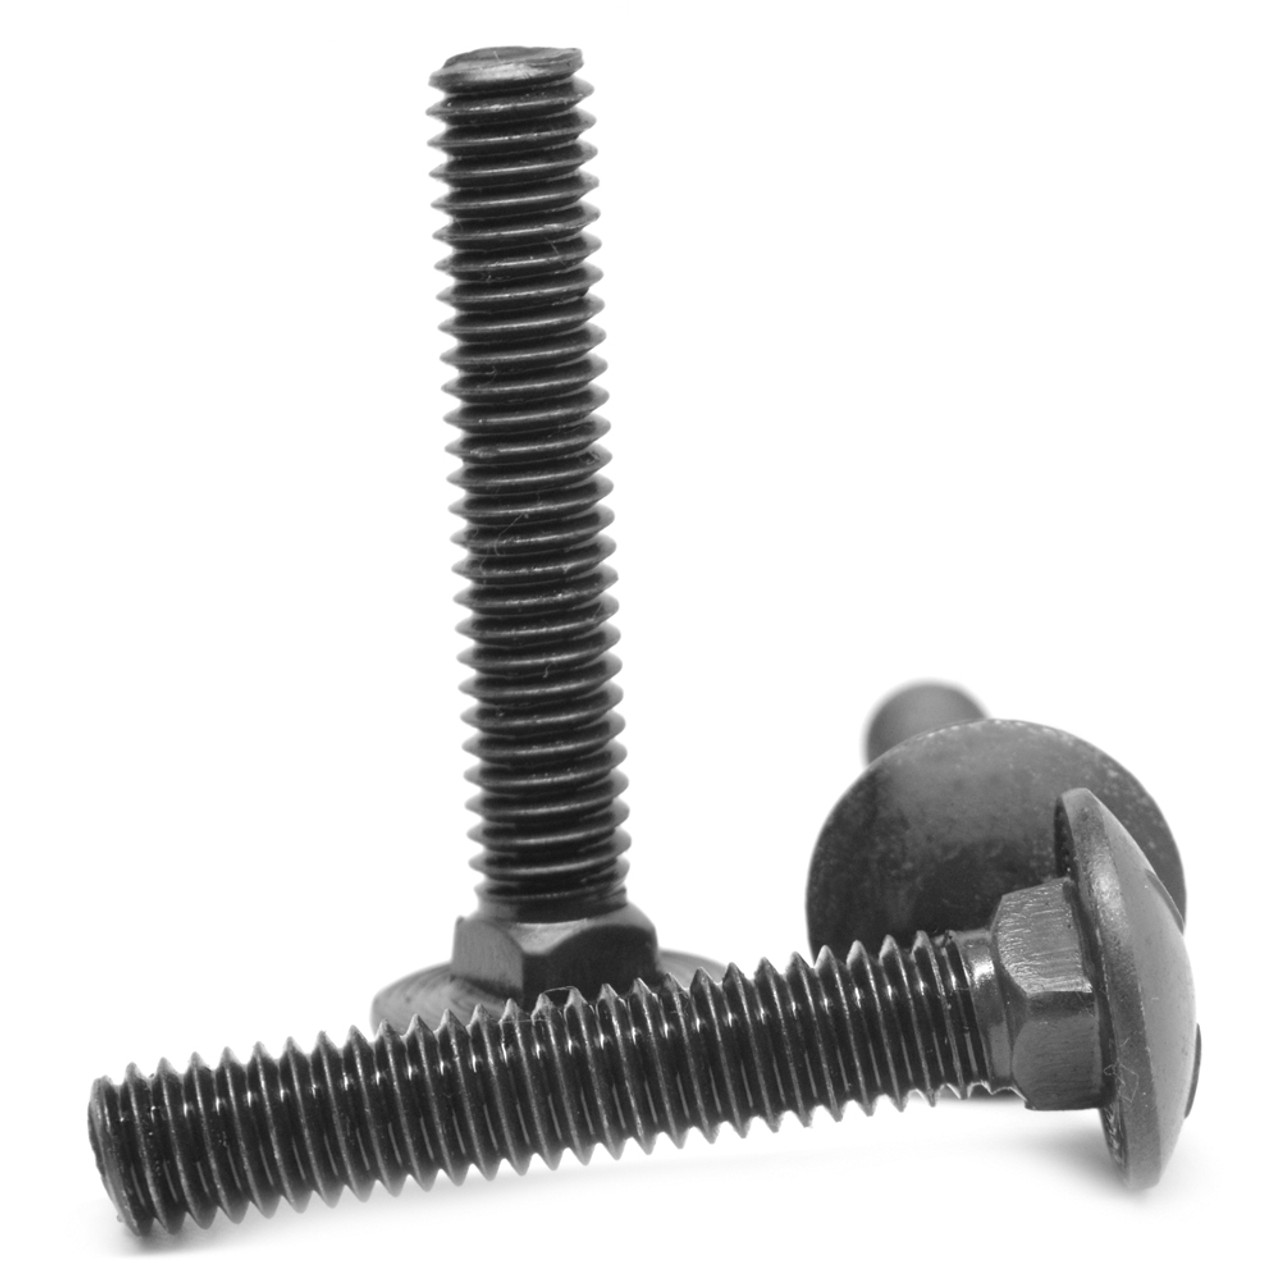 3/4-10 x 4 1/2 (FT) Coarse Thread Grade 8 Carriage Bolt Alloy Steel Thermal Black Oxide